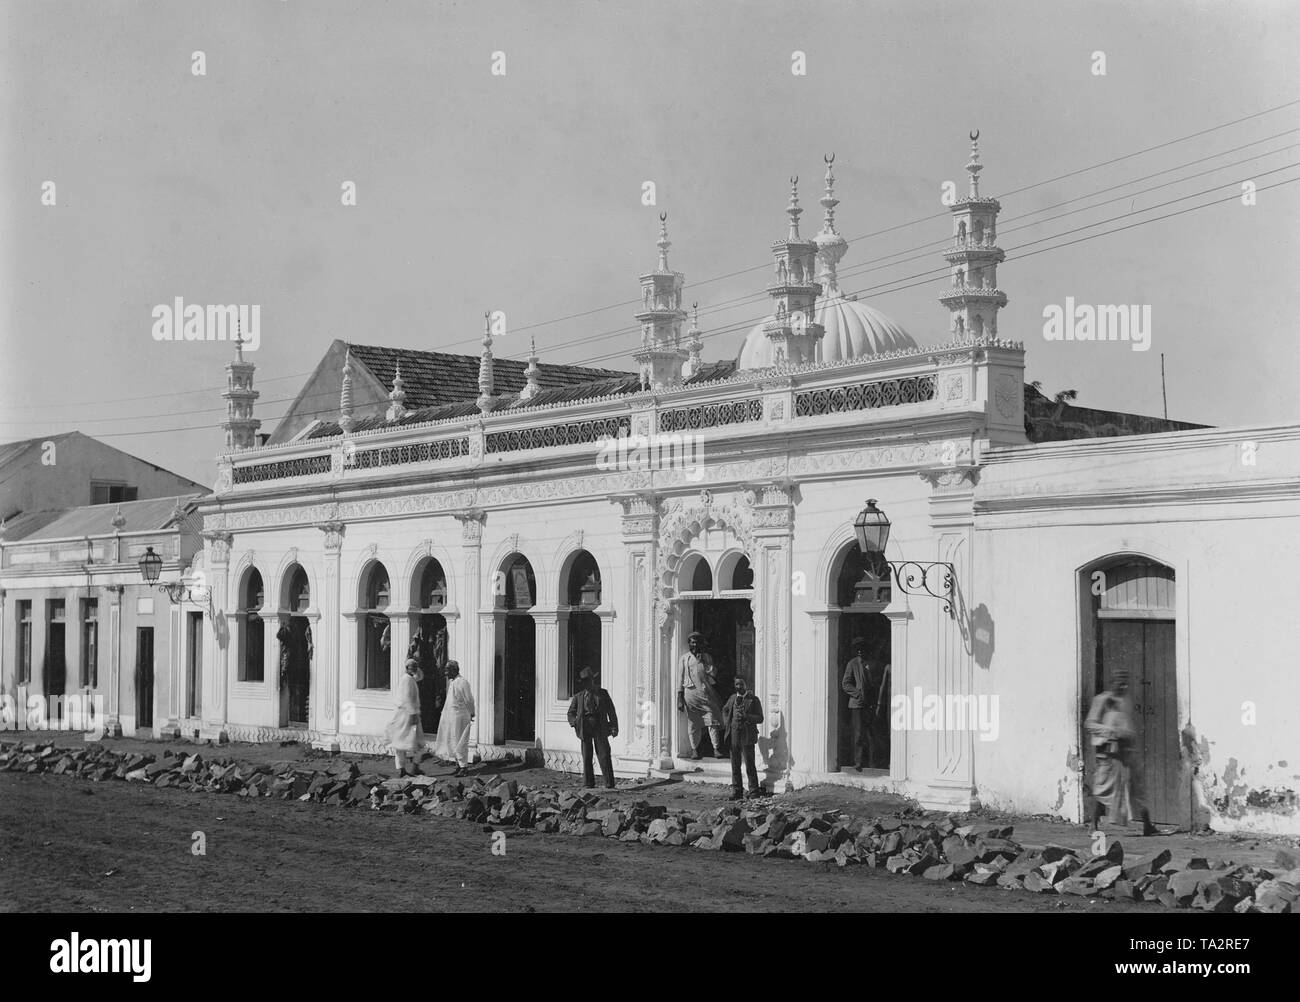 Mosque 'Mesquita da Baixa' in Lourenco Marques, the capital of the Portuguese colony of Mozambique, today Maputo. The mosque was built in 1876 and renovated from 2002 to 2005. 01.01.1900-31.12.1910 Photo: Joseph & Maurice Lazarus Stock Photo